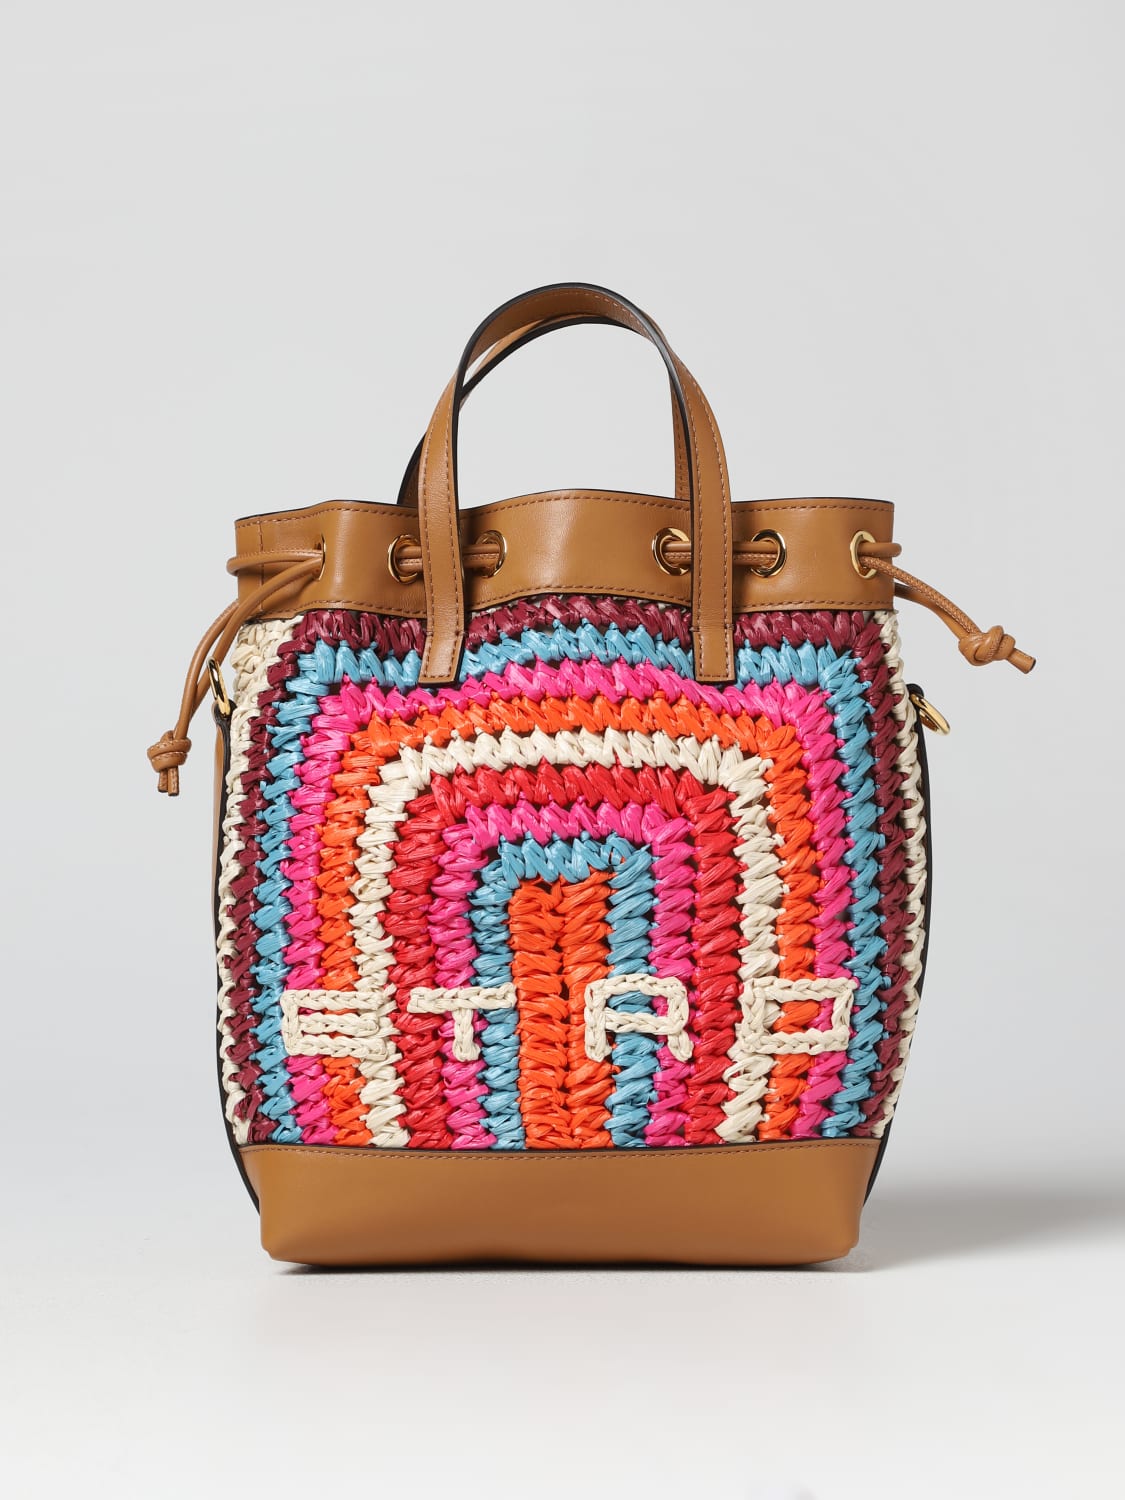 Etro Outlet: Raffia and leather bag - Red | Etro handbag 1N6269015 ...